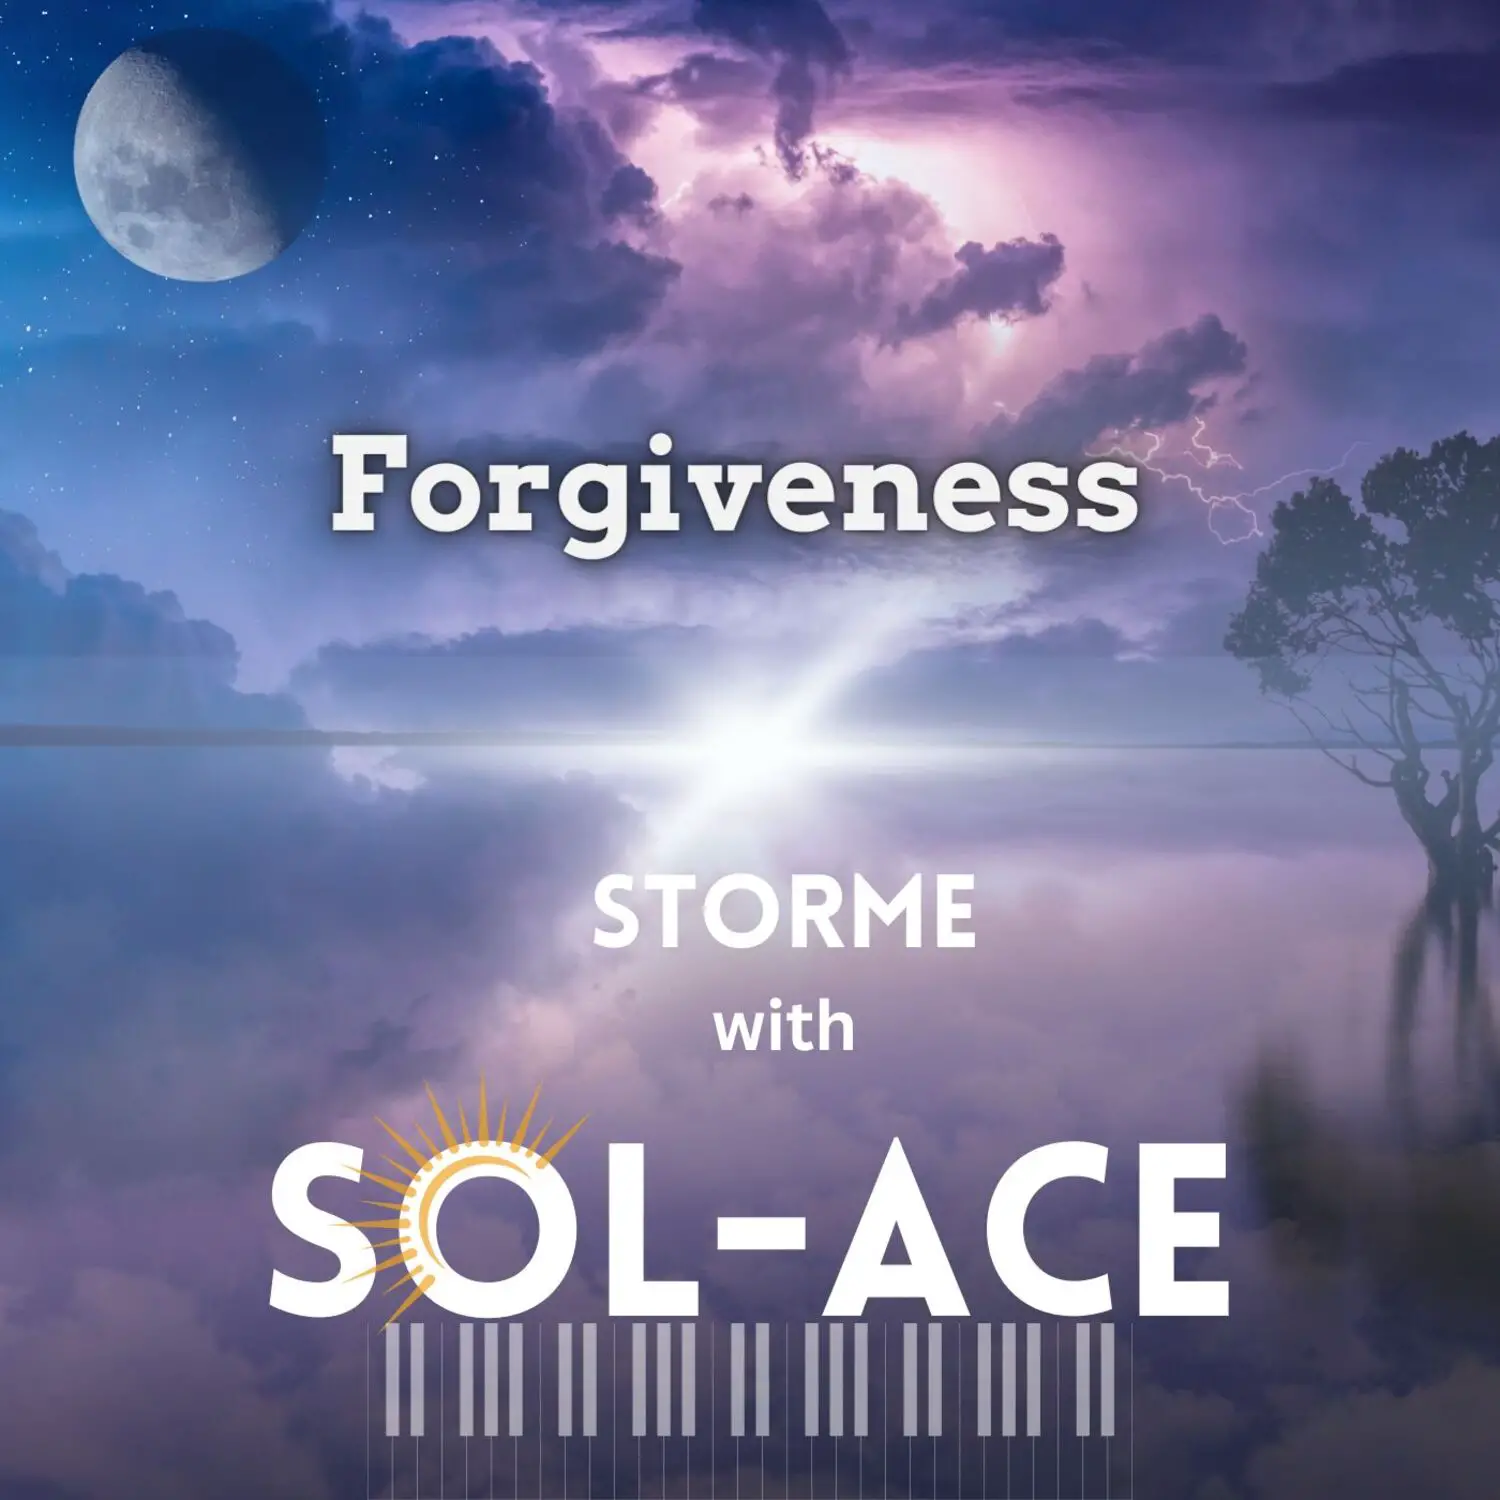 Forgiveness by Storme with SOL-ACE